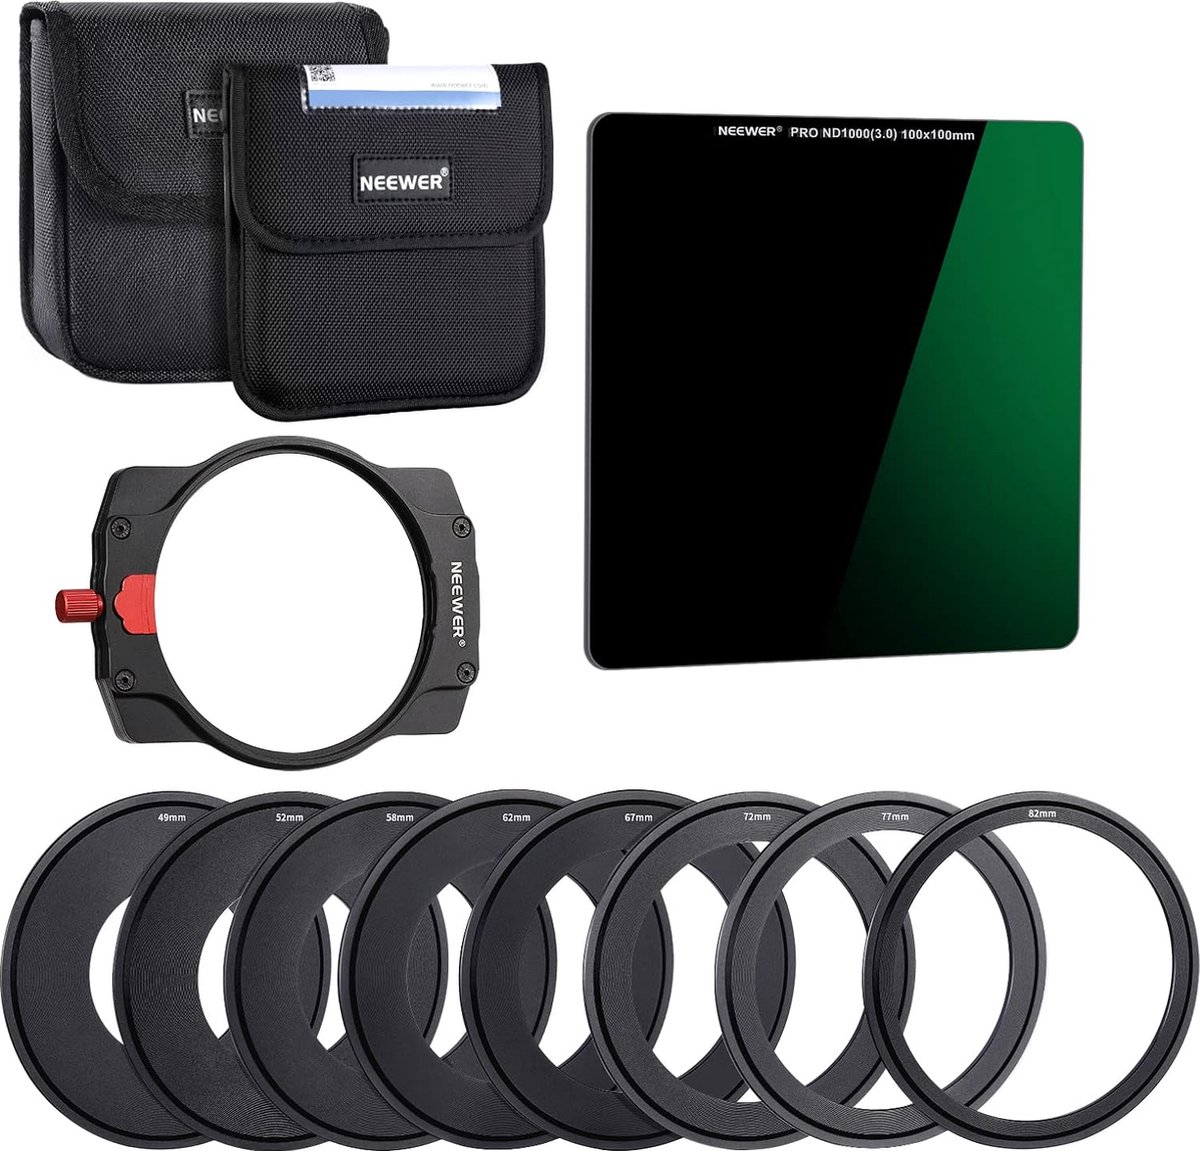 Neewer® - ND1000 Rectangular Filter Set 100 x 100 mm, Square ND Filter with 10 Apertures, Filter Holder, 8 Filter Adapter Rings, 30 Layers, Multi-resistant Nano Coating, Ultra Thin Rectangular,